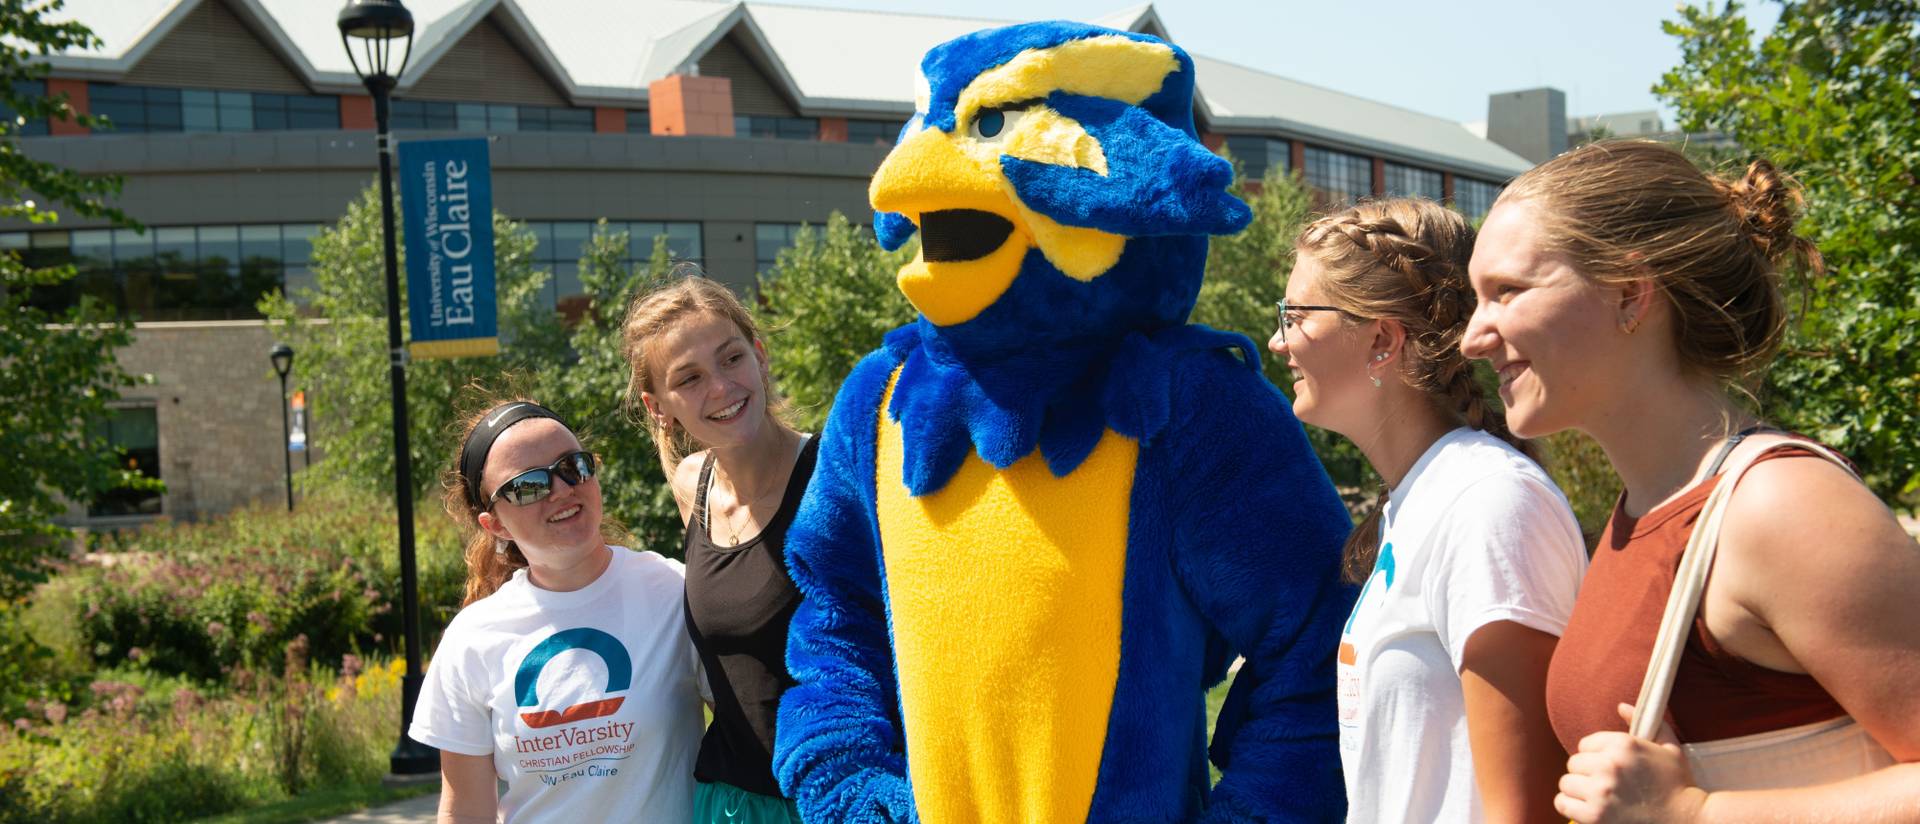 First year students enjoy Welcome Week activities on lower campus.  Blu the Blugold Mascot at the event.